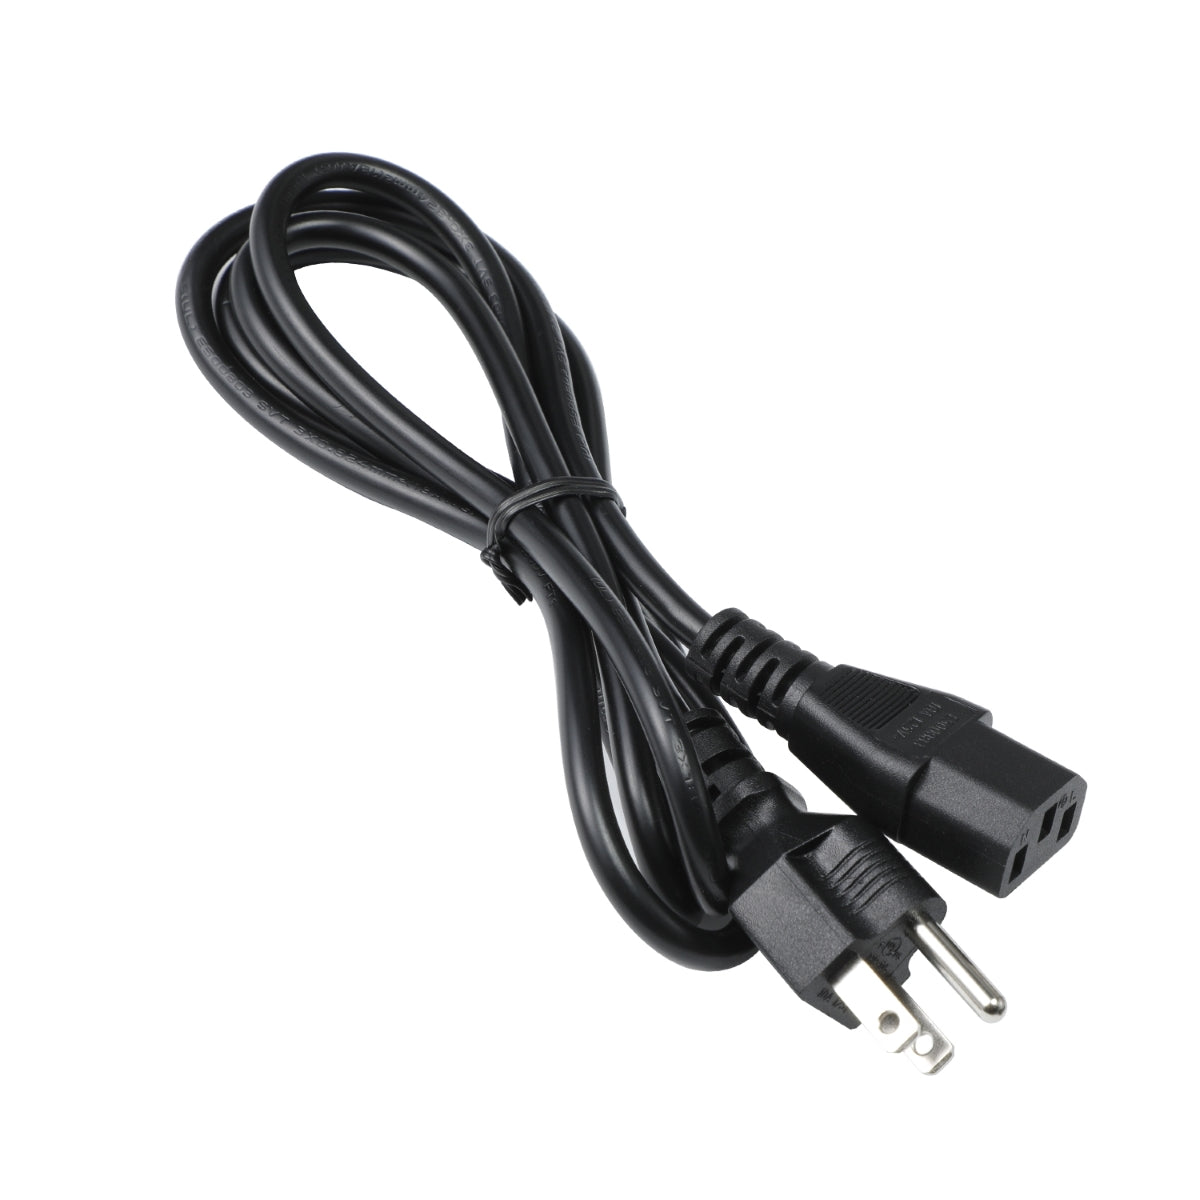 Power Cord for BenQ ZOWIE RL2455T e-Sports Monitor.